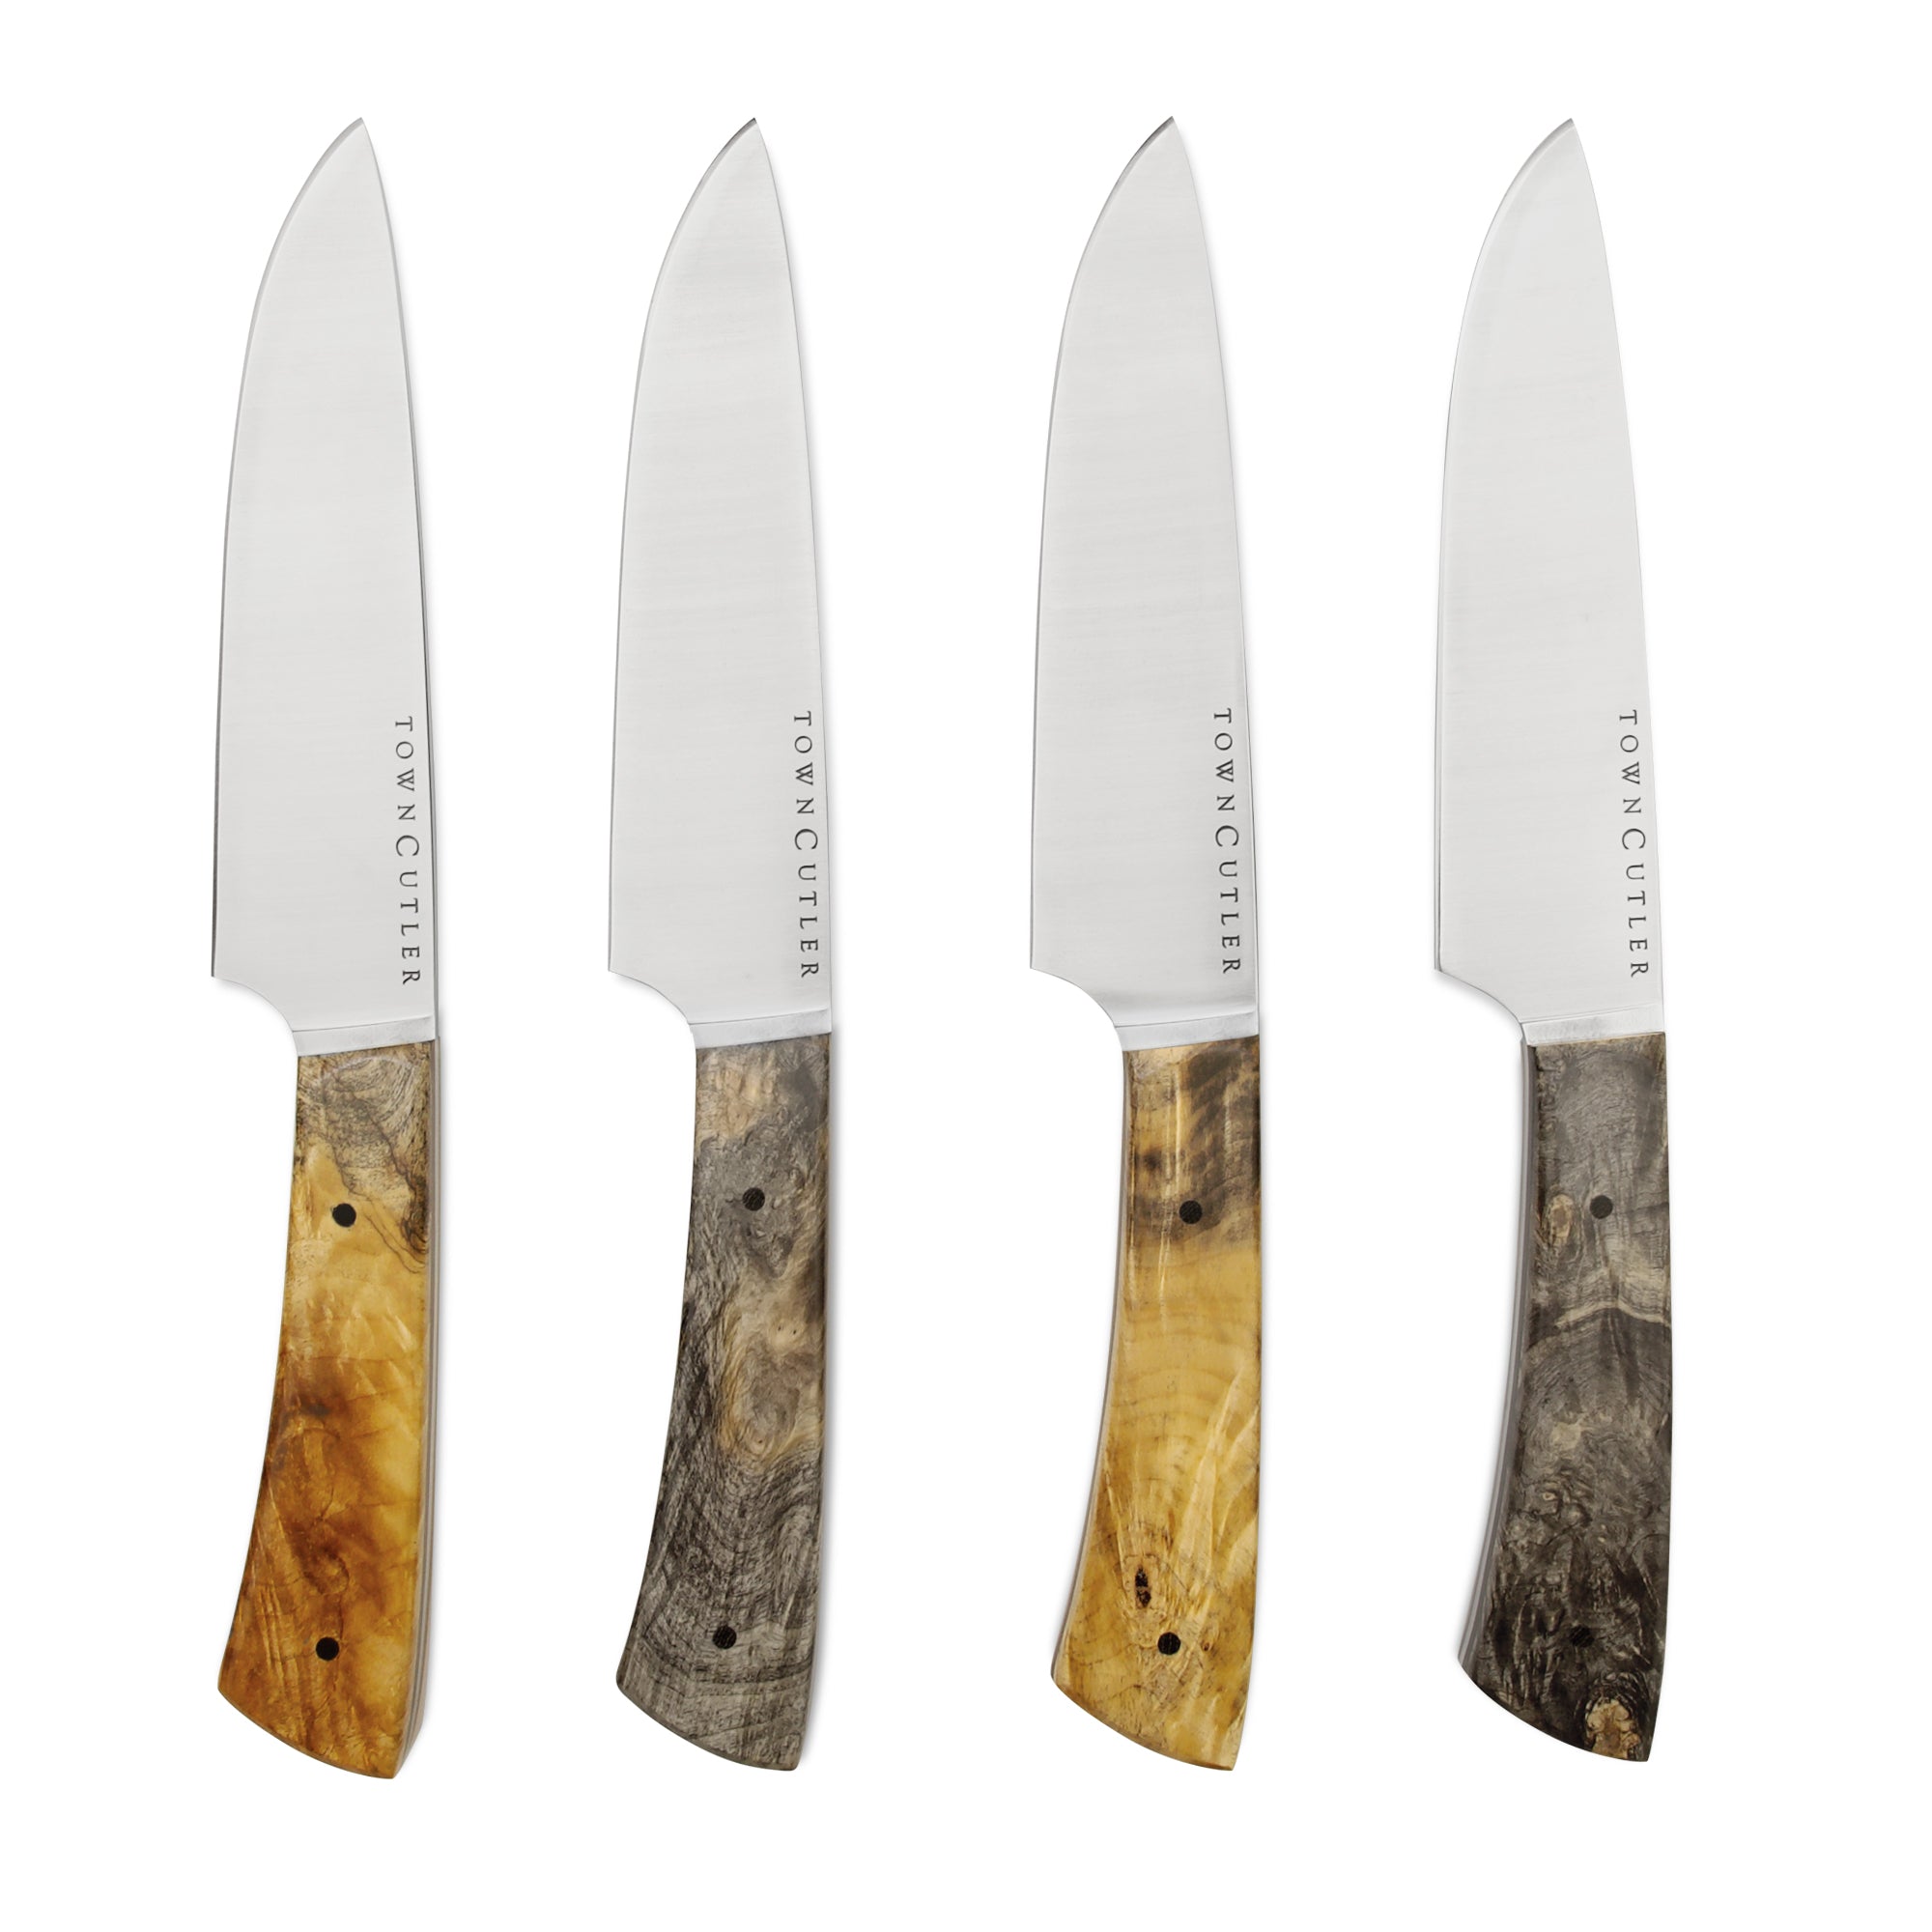 Town Cutler steak knives set of 4 in three different styles. All handmade in America.